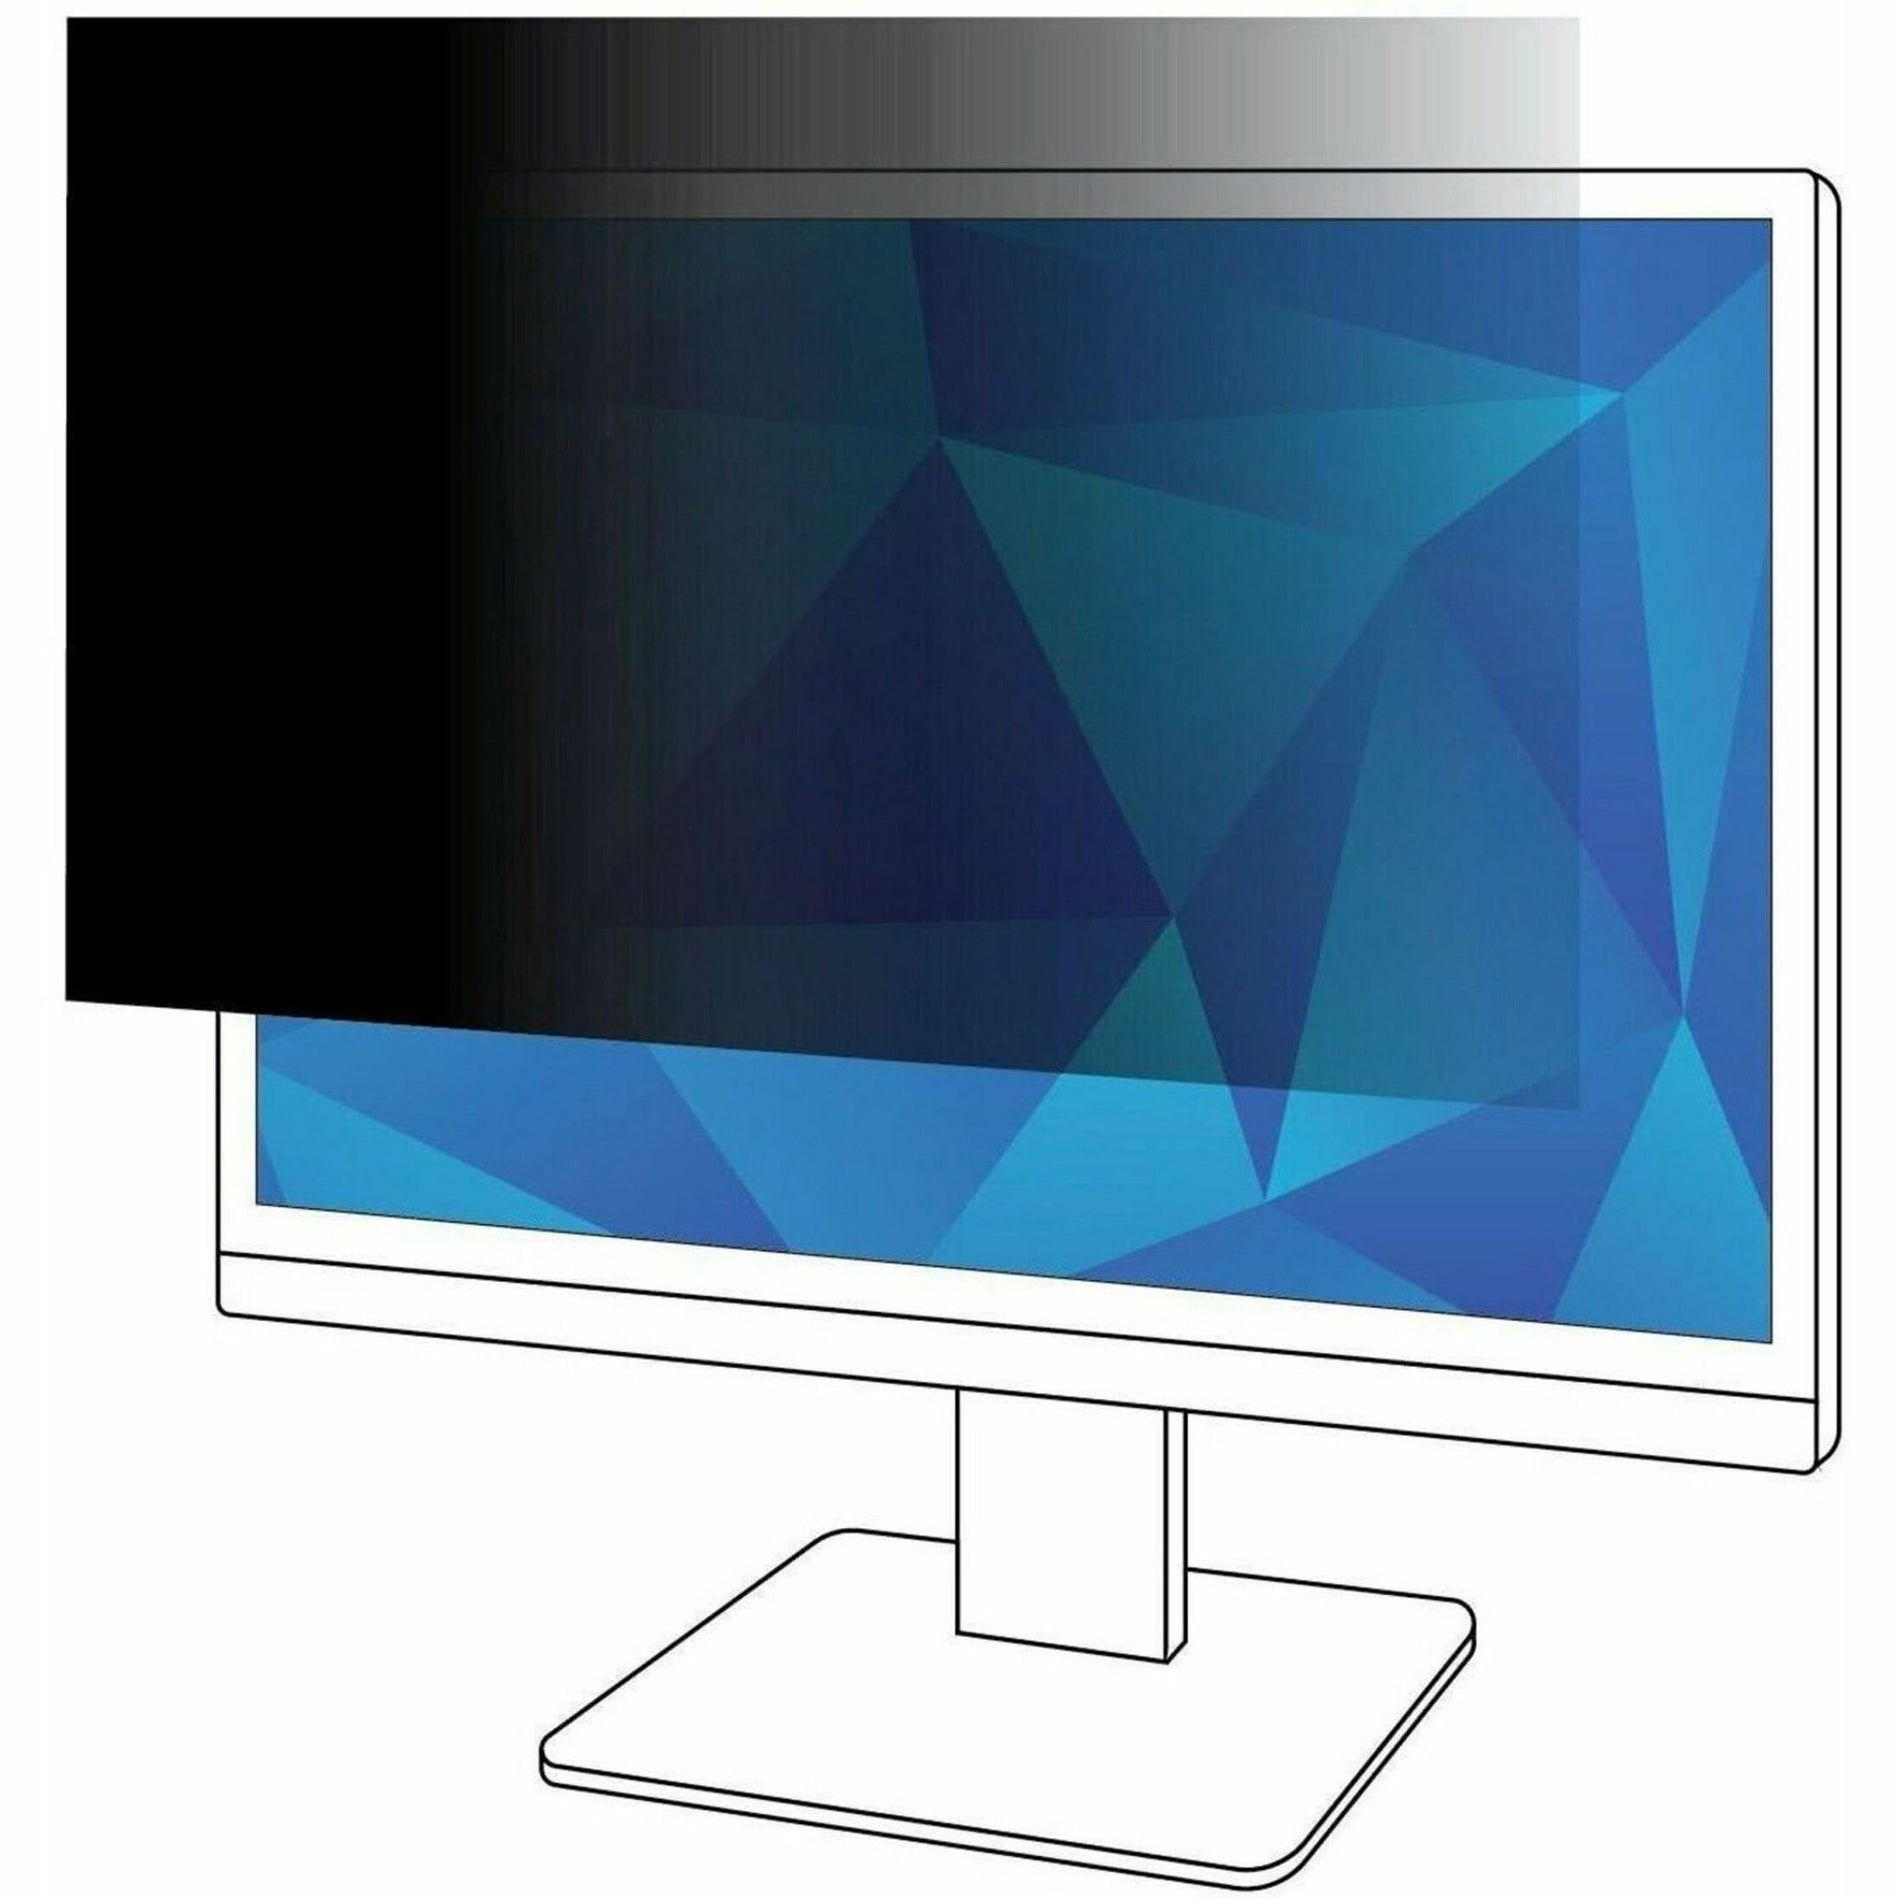 3M PF236W9B Privacy Filter for 23.6" Wide-screen Monitors, 16:9, Easy to Apply, Easy Clean, Limited Viewing Angle, Matte Black